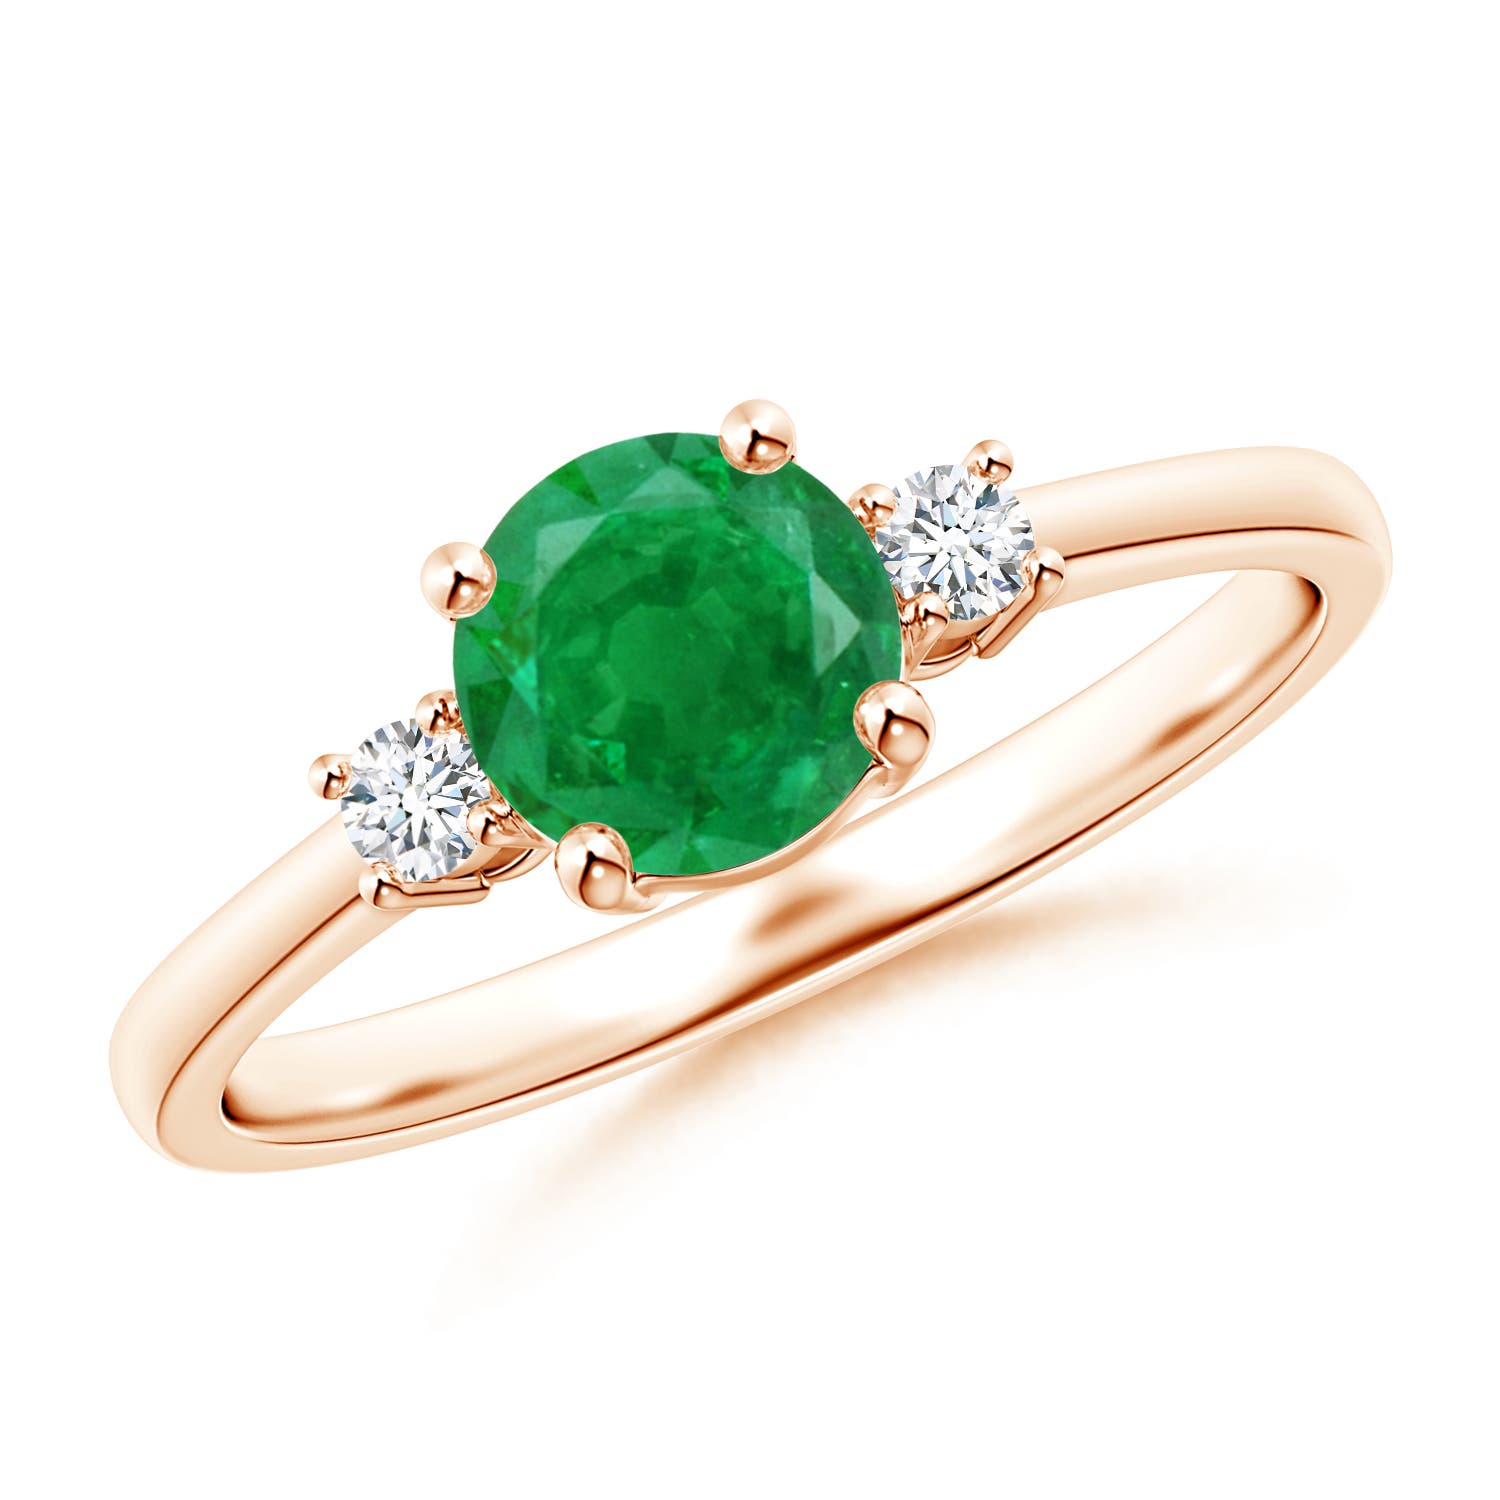 AA - Emerald / 0.84 CT / 14 KT Rose Gold